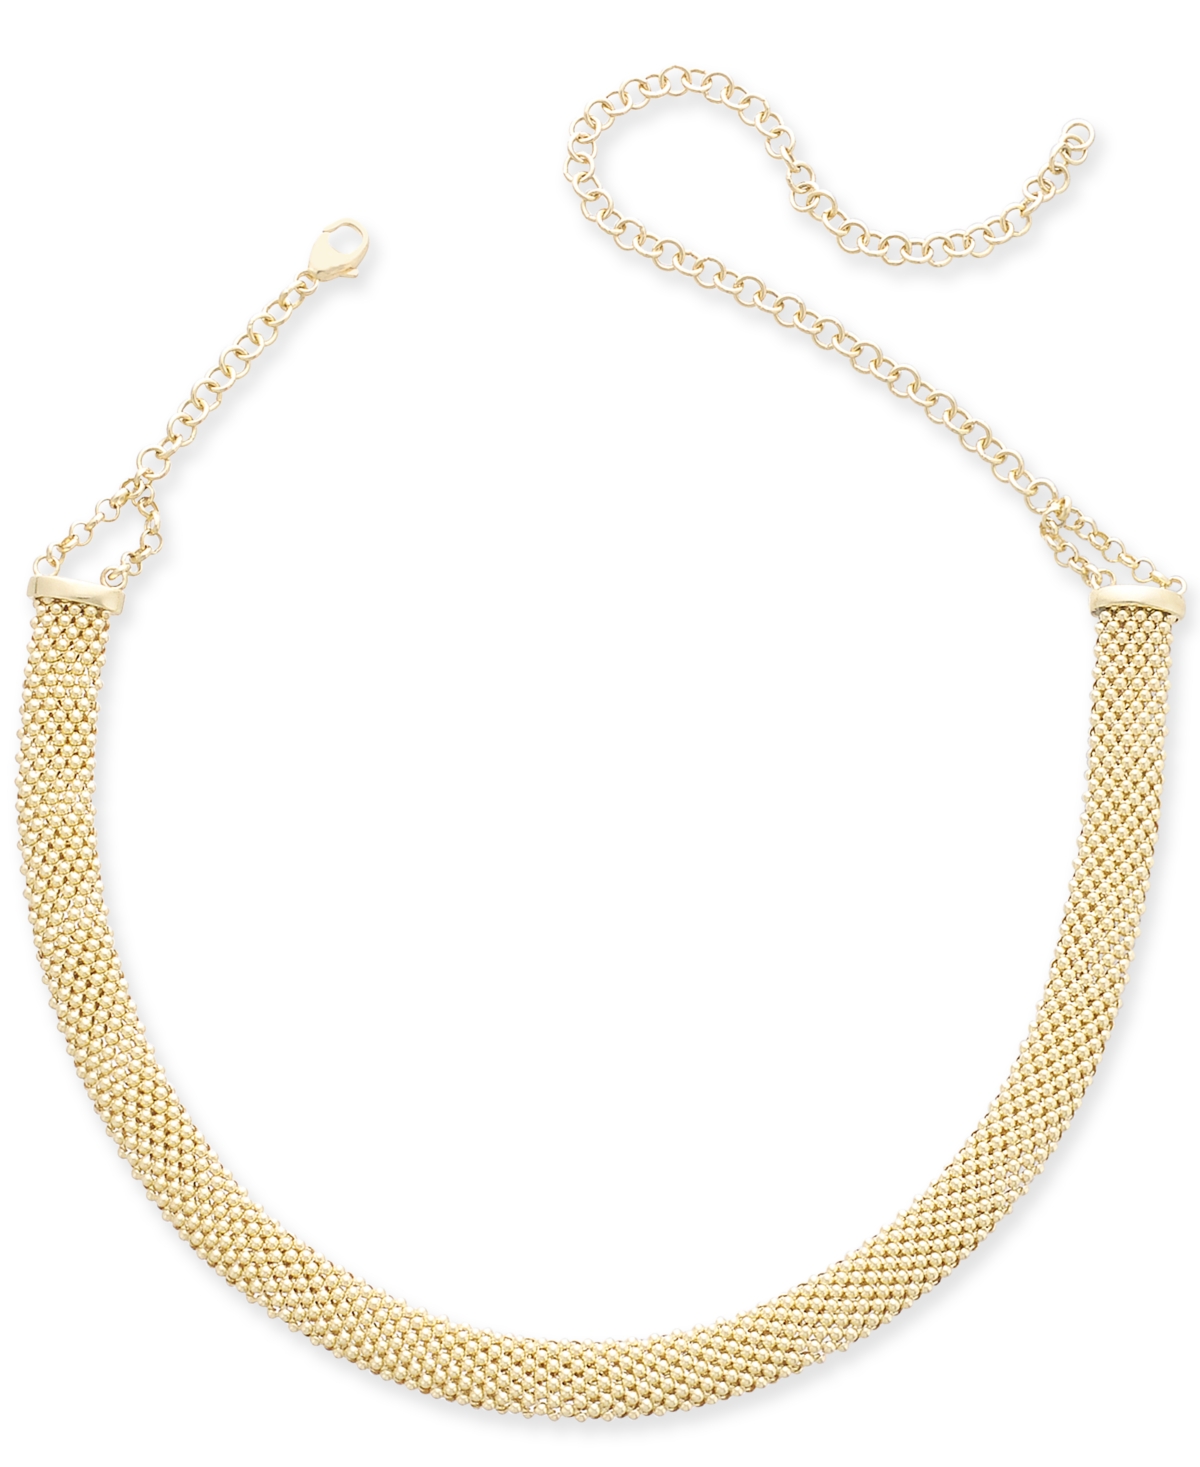 Popcorn Mesh Link Choker Necklace in 14k Gold-Plated Sterling Silver, 13" + 5" extender - Yellow Gold